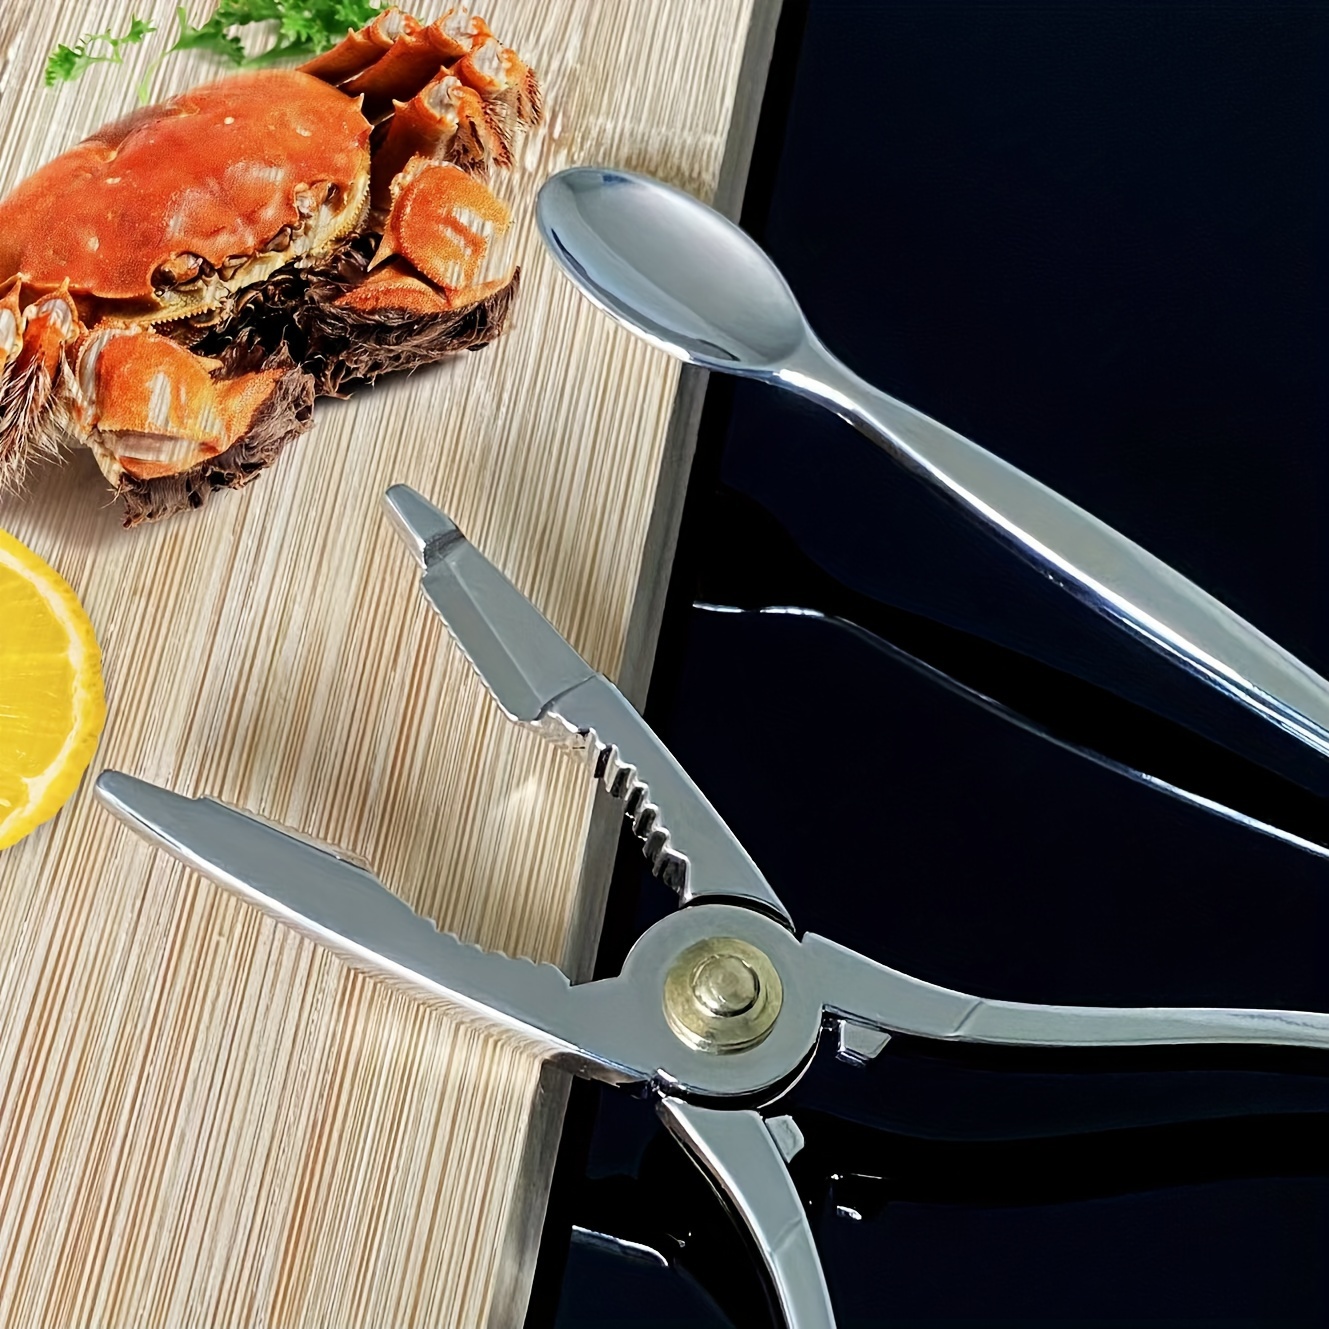 

1 Set, Crab Eating Tool, Professional Seafood Shell Cracker, Zinc Alloy Crab Leg Cracker And Spoon, Silver Dining Accessories